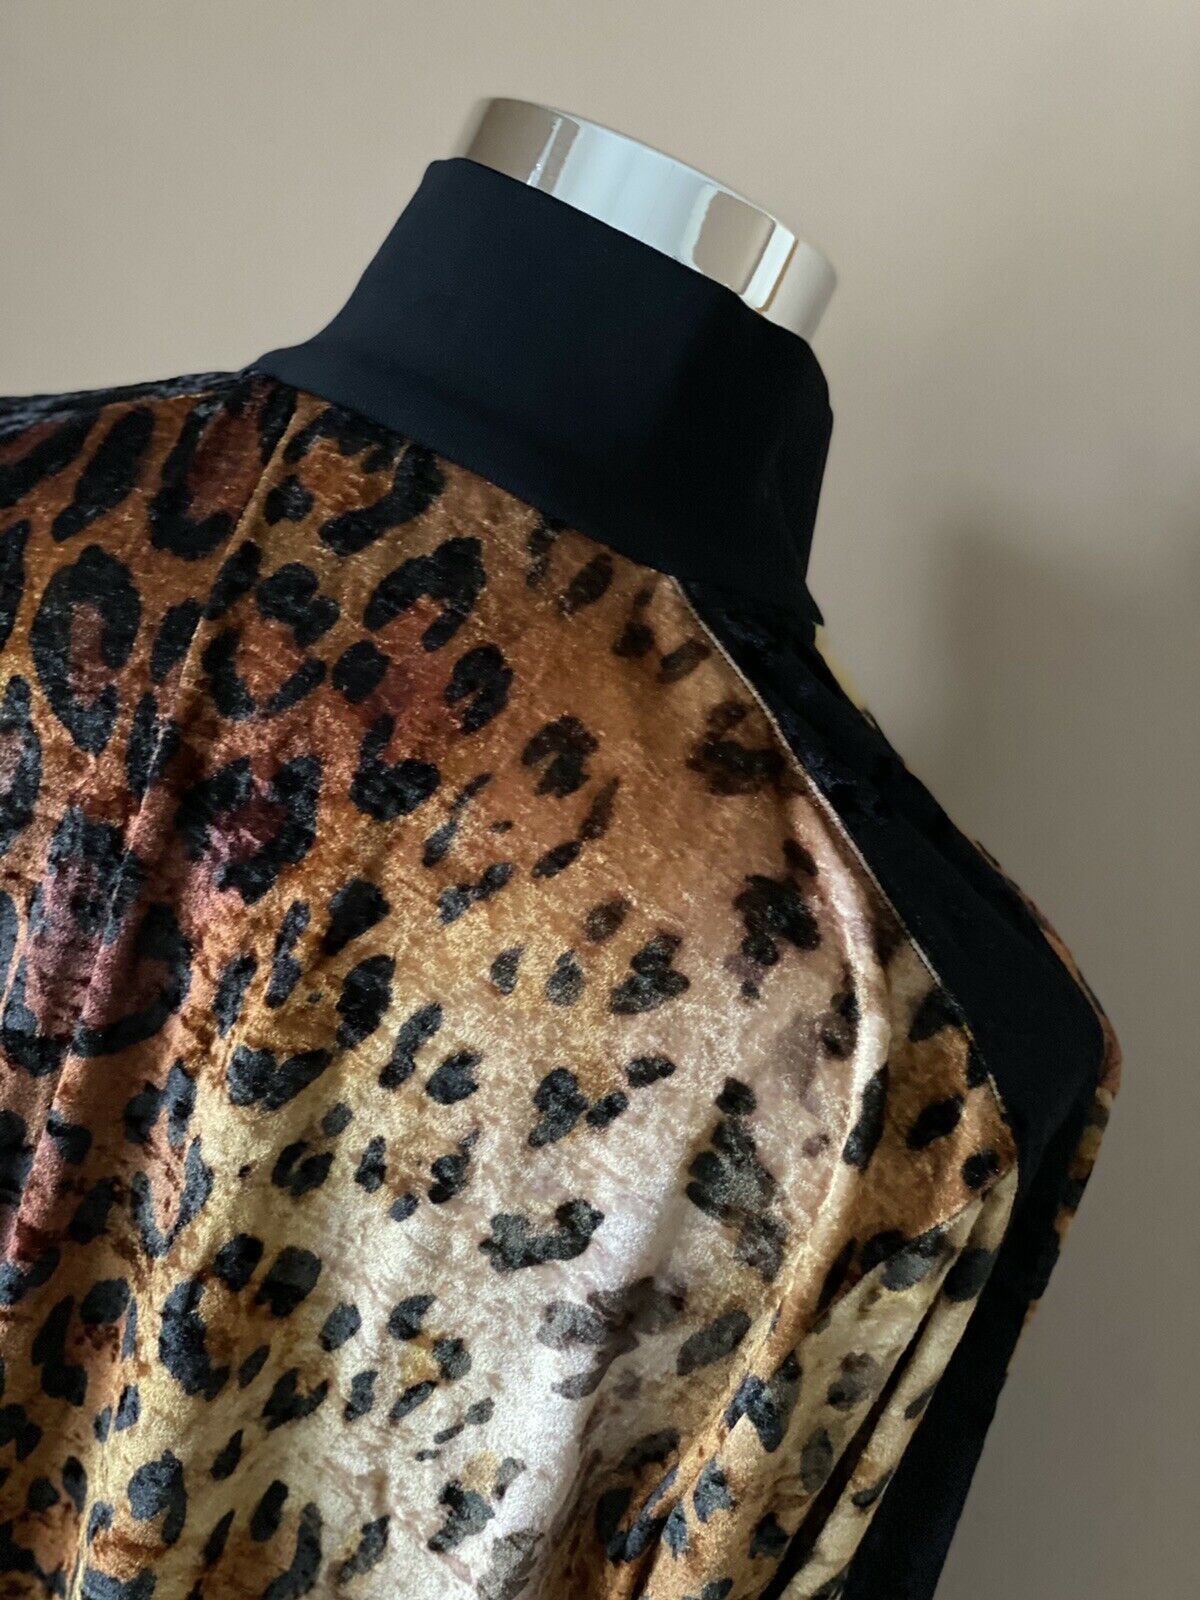 New Versace Men's Animal-Print Mitchel-fit Small Jacket Made in Italy